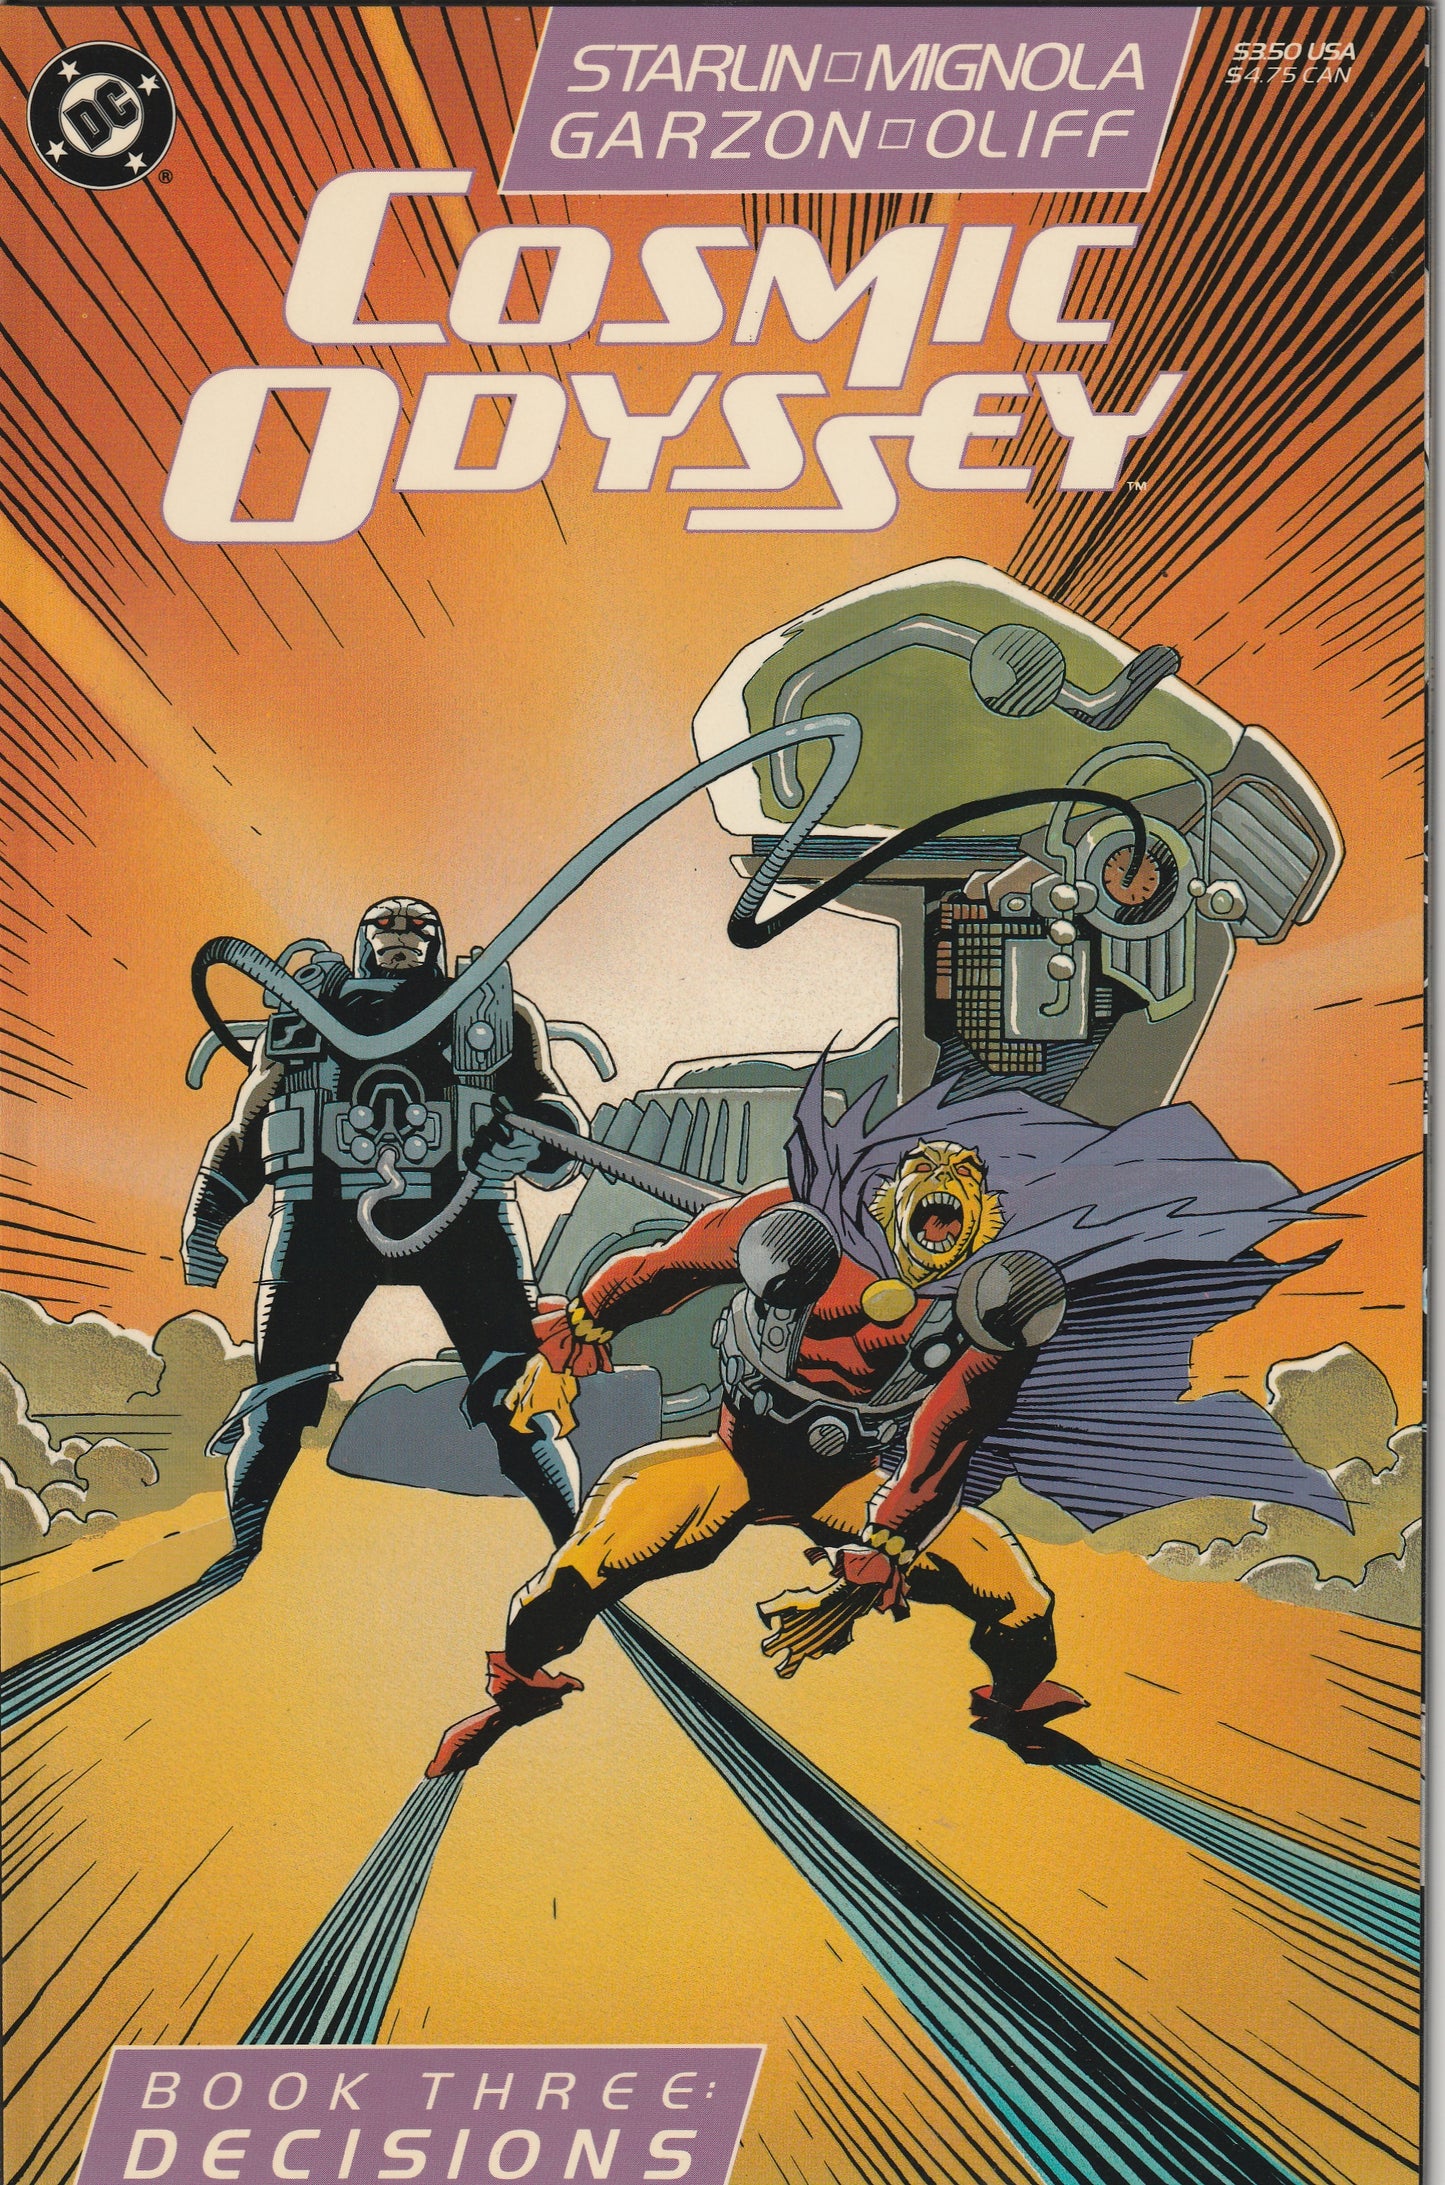 Cosmic Odyssey (1988-1989) - Complete 4 issue mini-series